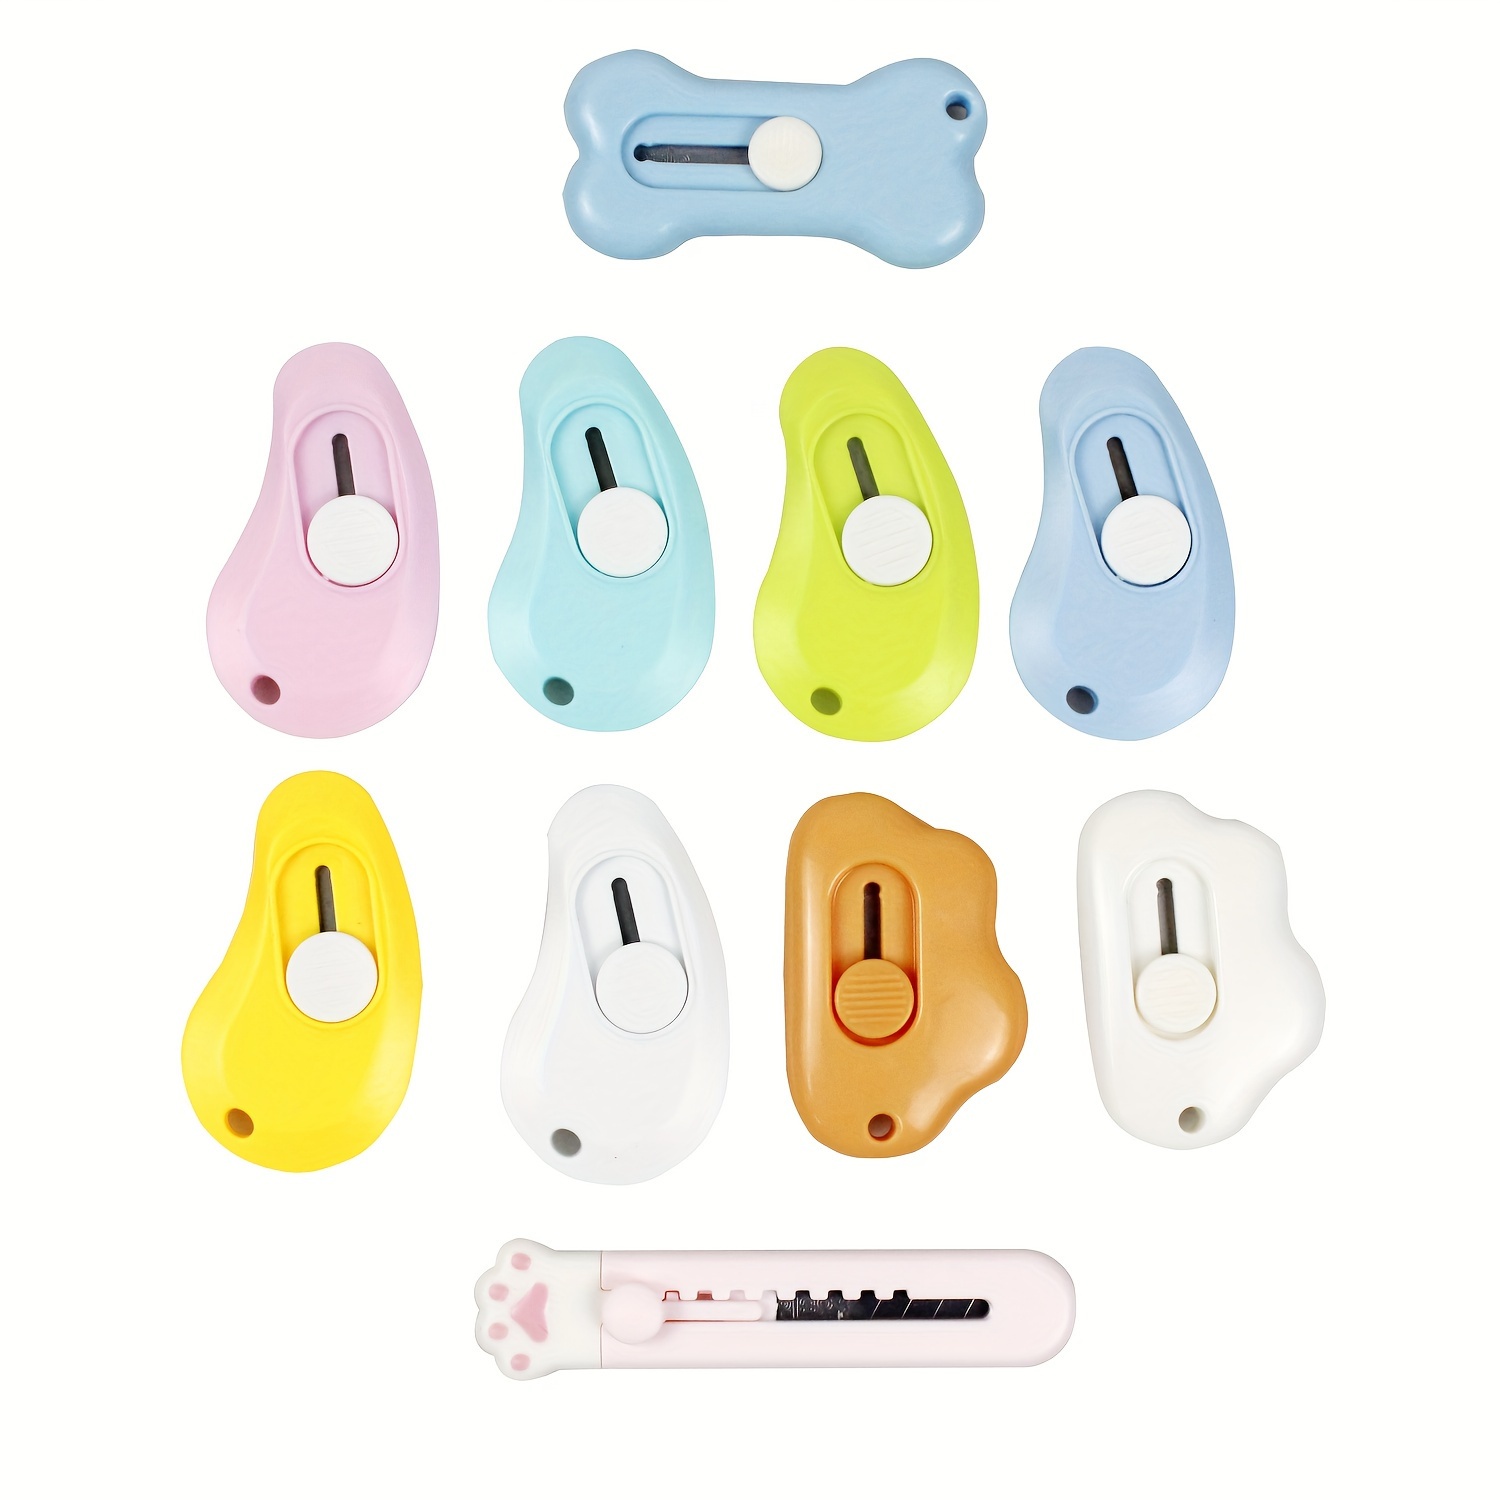 

10pcs Mini Retractable Utility Knife, Pocket Box Cutters, Plastic Letter Opener, Slide Open With Keychain Hole For Box, Letter, Envelope And Daily Use.